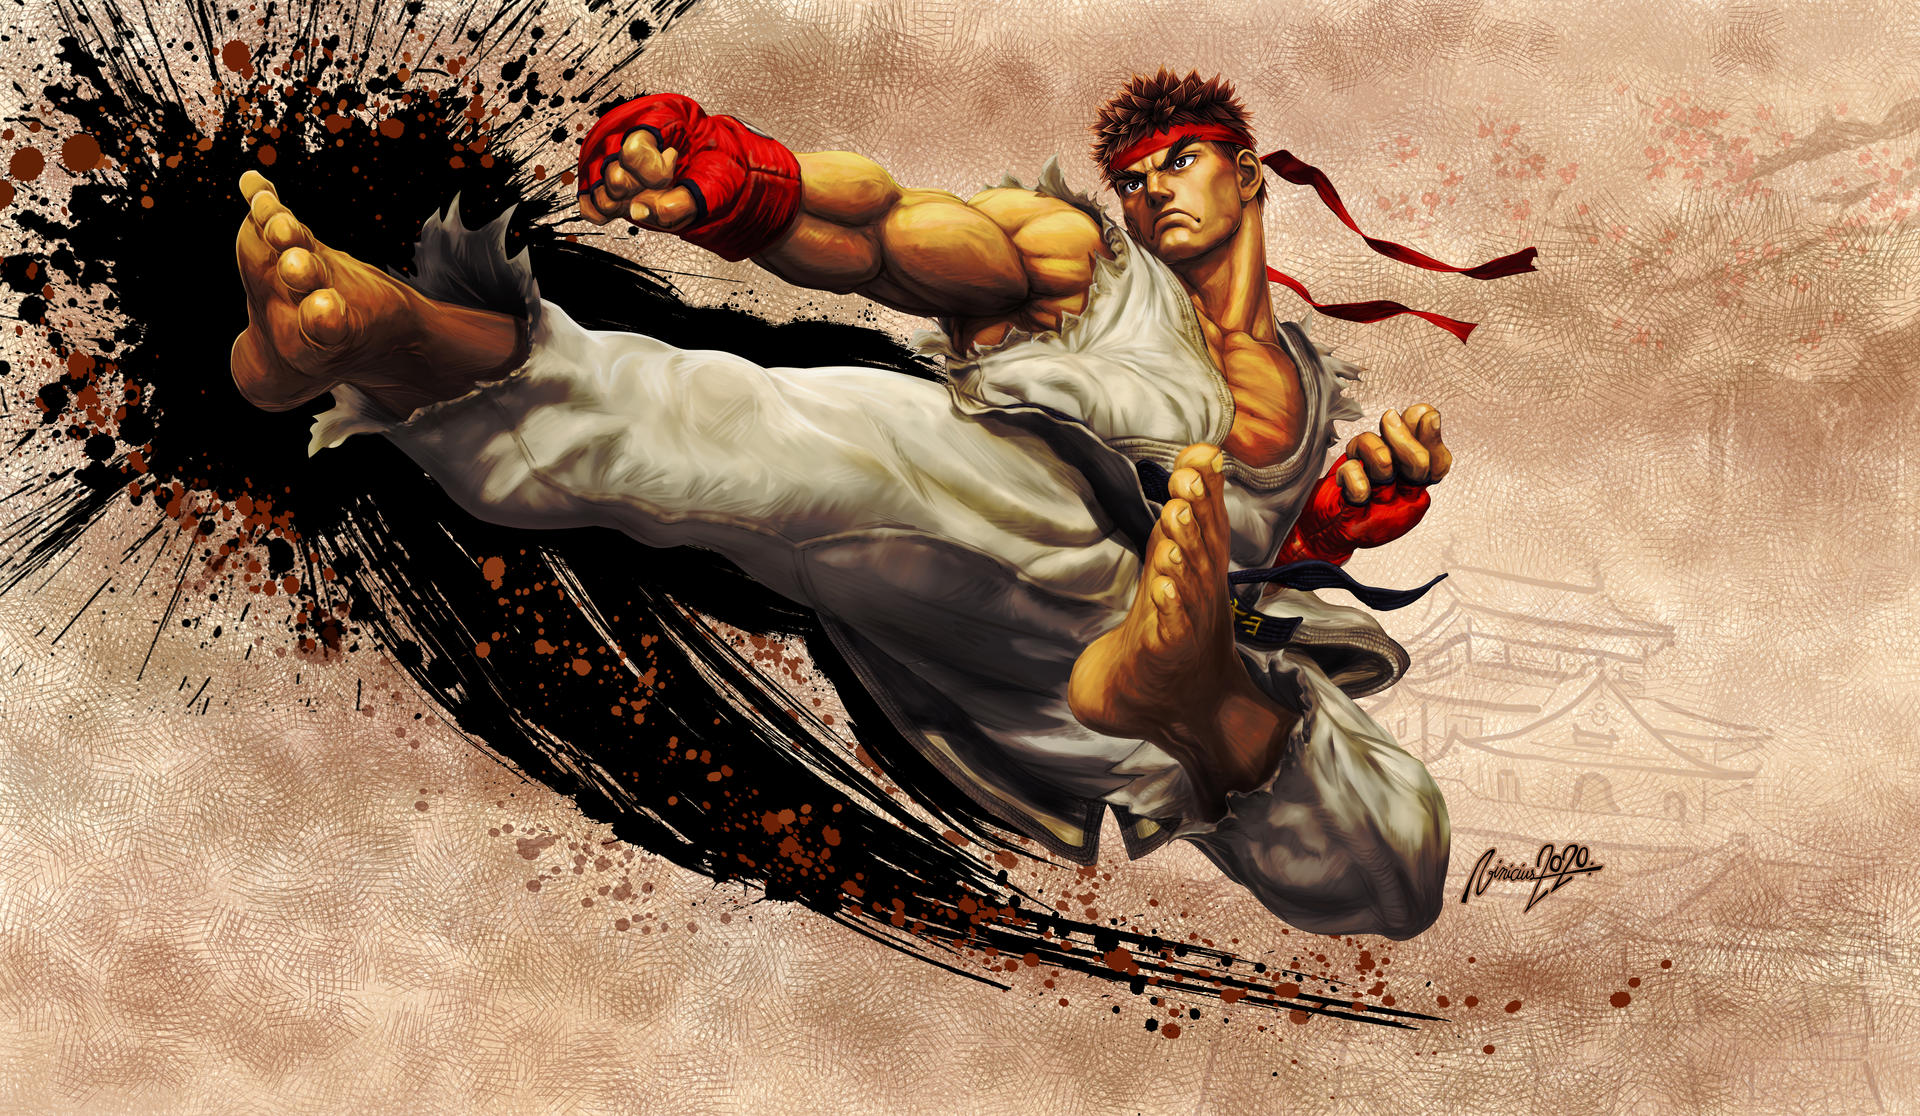 CHARACTER SELECT - RYU by viniciusmt2007 on DeviantArt